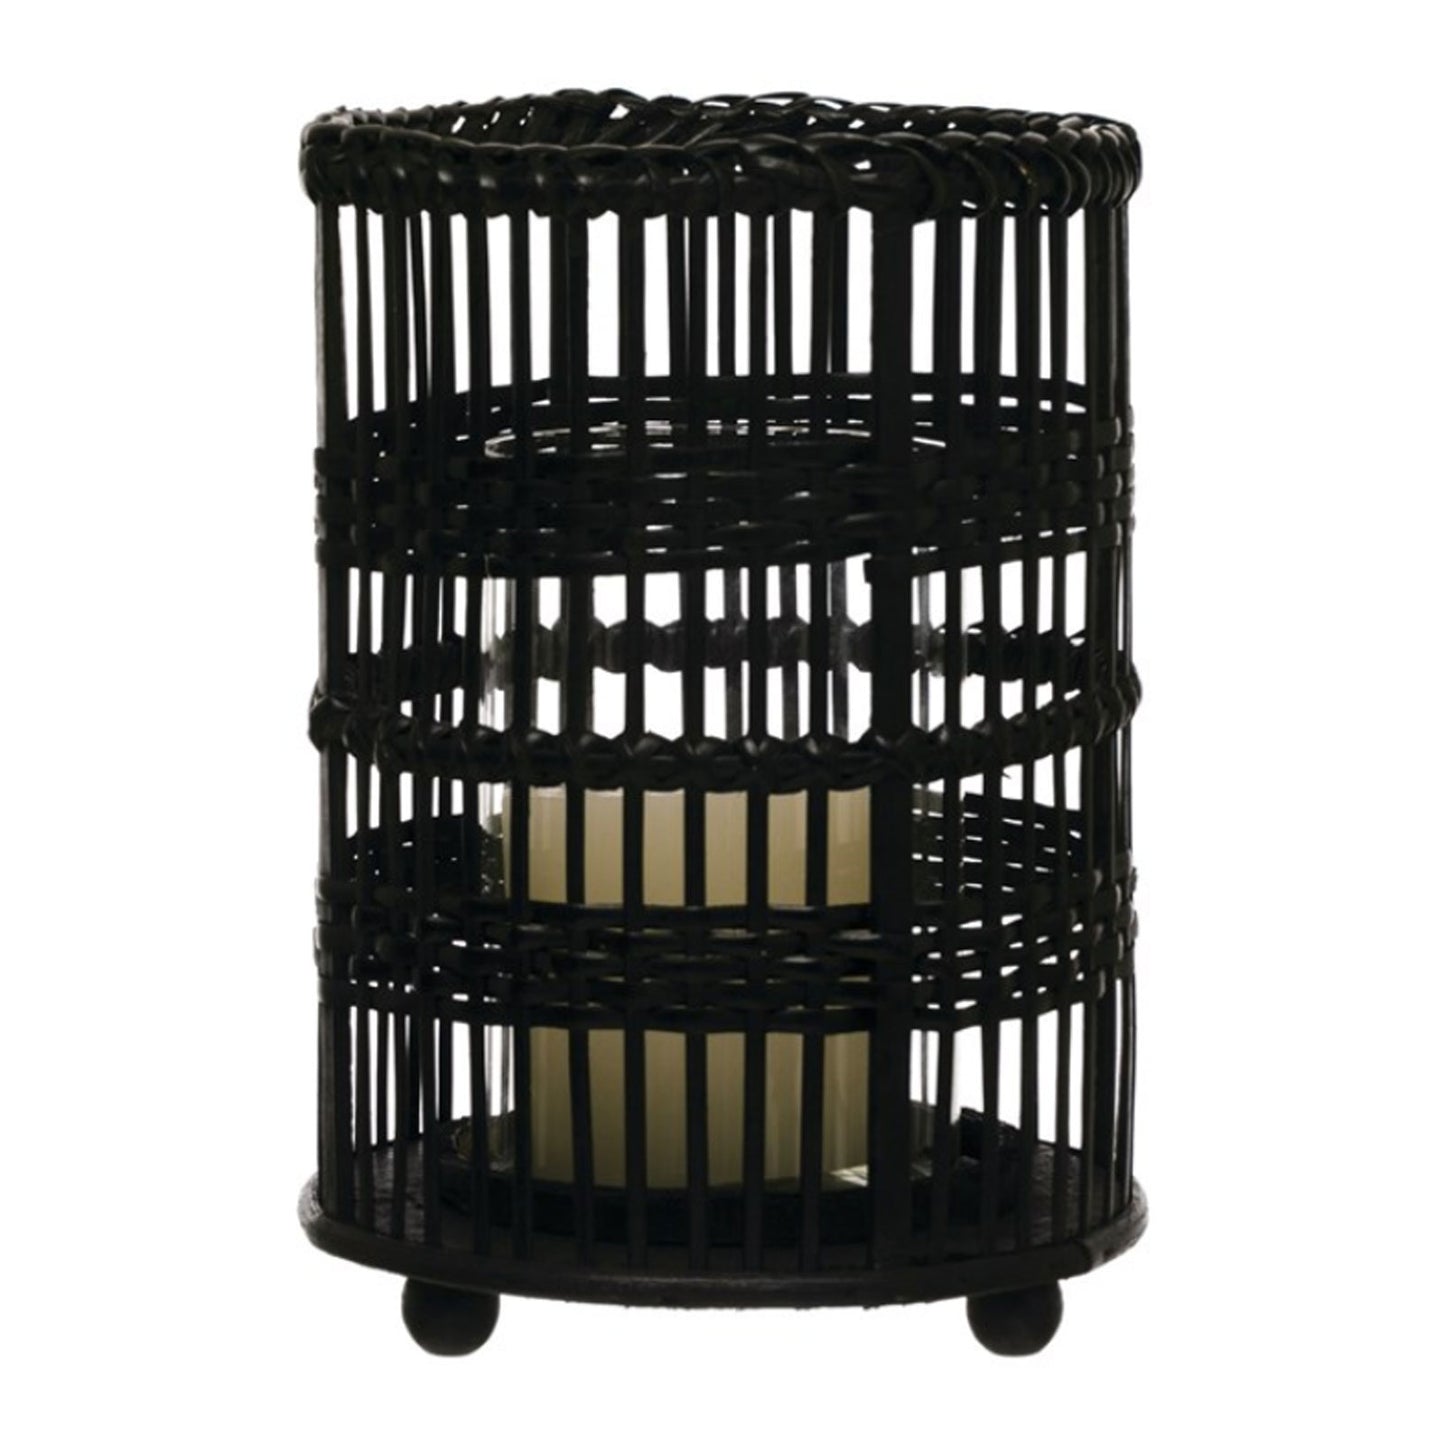 Woven Rattan, Bamboo & Glass Candle Holder, Black